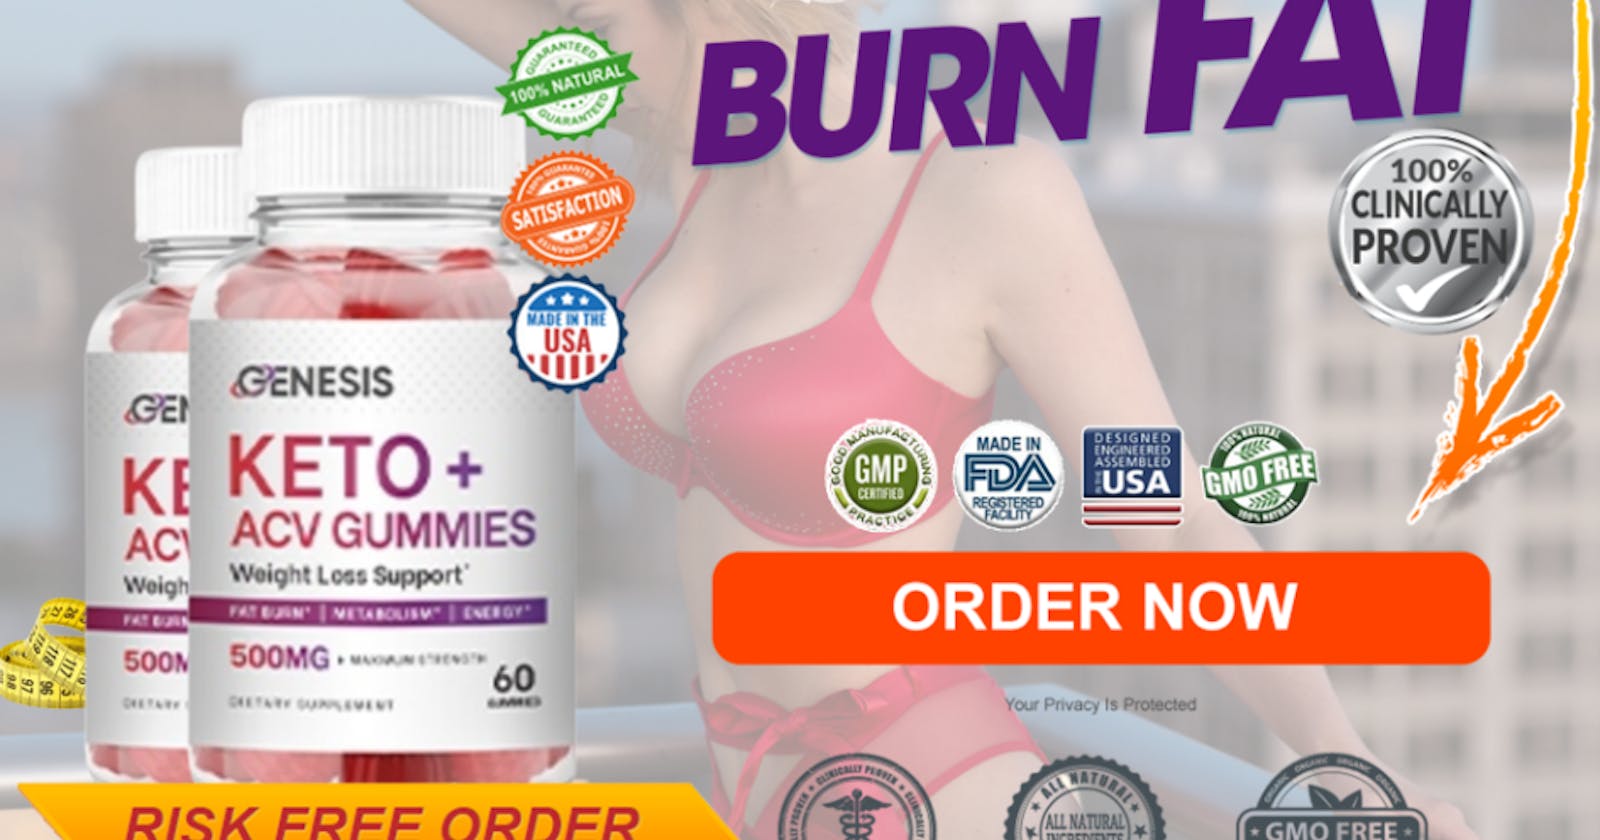 Genesis Keto ACV Gummies Reviews Healthy Weight Loss Support !